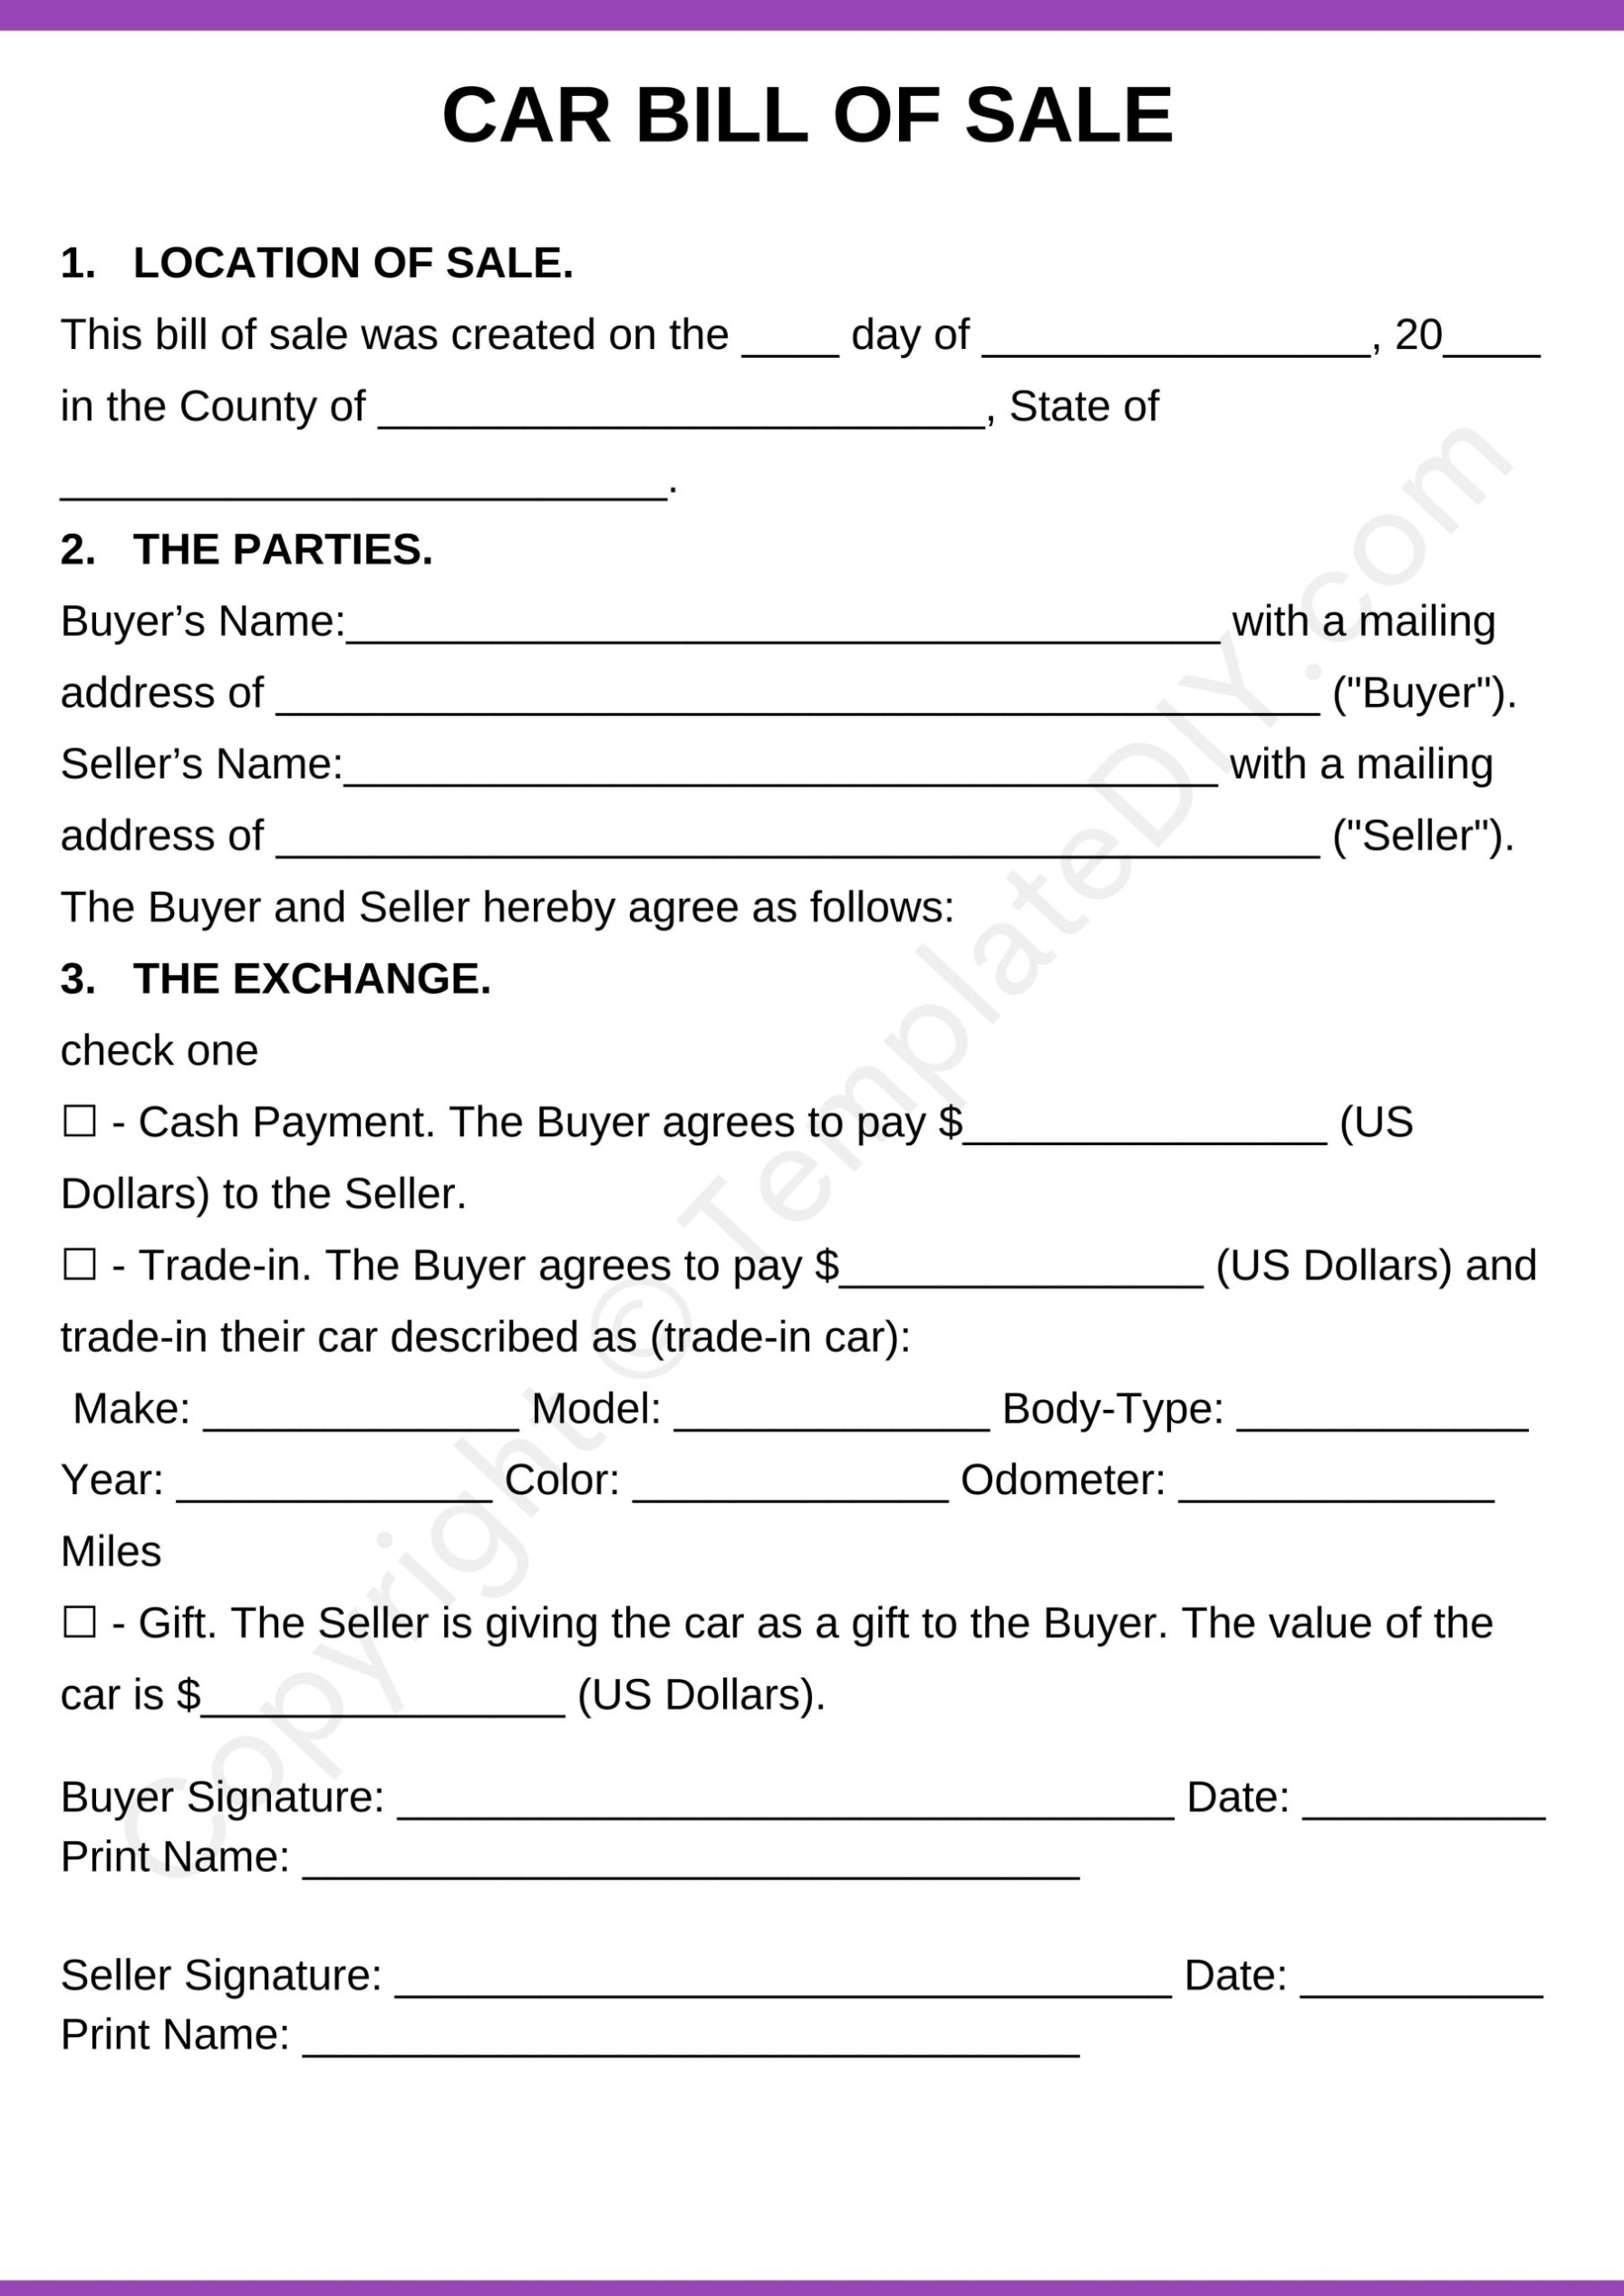 Car Bill Of Sale Blank Printable Form Template In Pdf & Word For Car Bill Of Sale Word Template